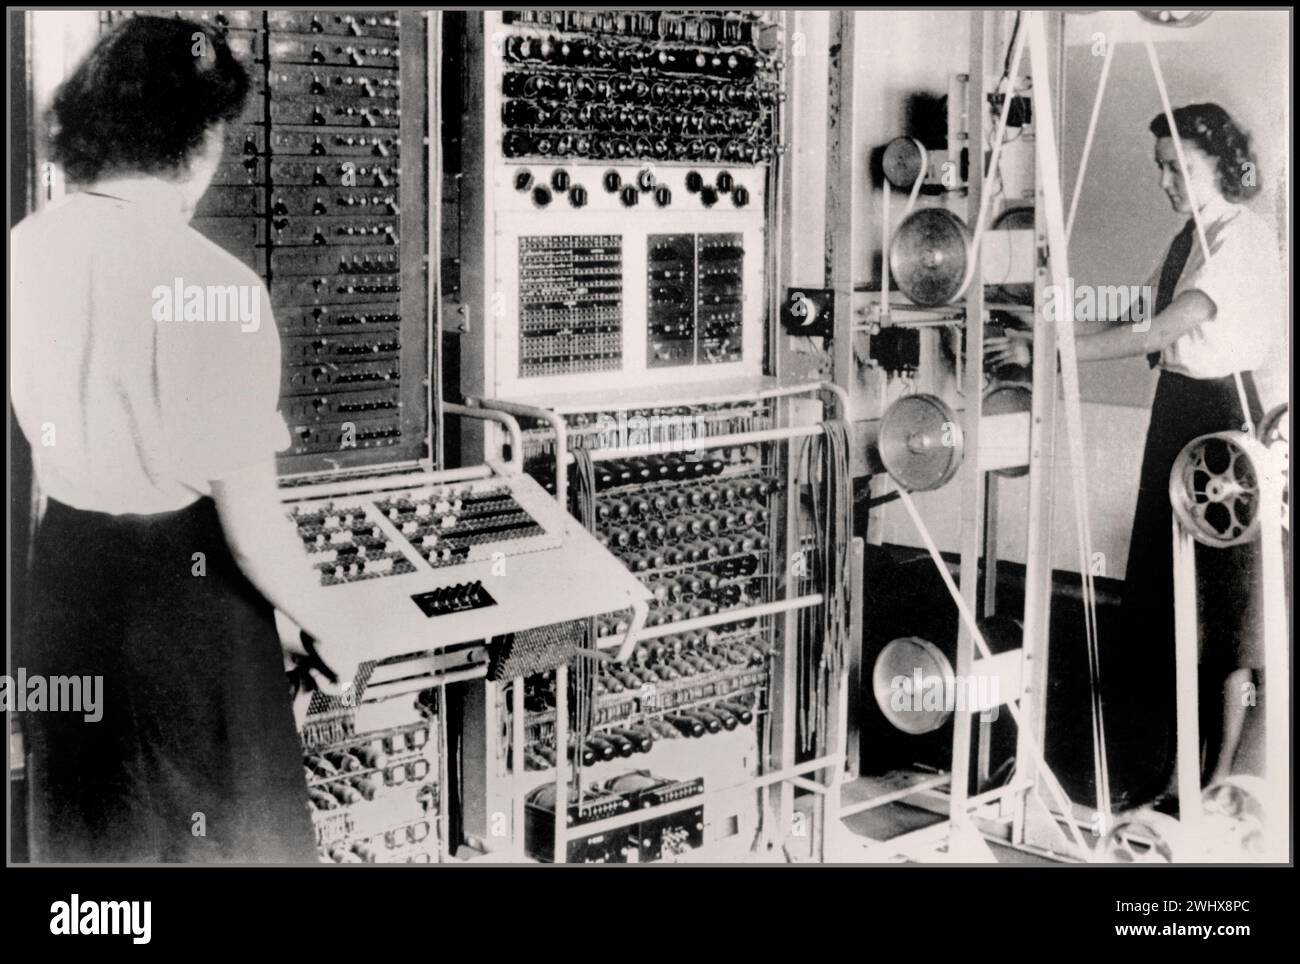 WW2 CODEBREAKING COMPUTER Colossus Mark 2 codebreaking computer being operated by Dorothy Du Boisson (left) and Elsie Booker (right), 1943 Colossus reduced time to work out Lorenz chi-wheel settings and enabled more messages to be deciphered and the whole code-breaking operation accelerated. The information gleaned from the decrypted messages is widely acknowledged to have shortened the war by many months, saving thousands of lives. Colossus Mark 2  used shift registers to quintuple the processing speed, first worked on 1 June 1944, just in time for Normandy landings on D-Day Stock Photo